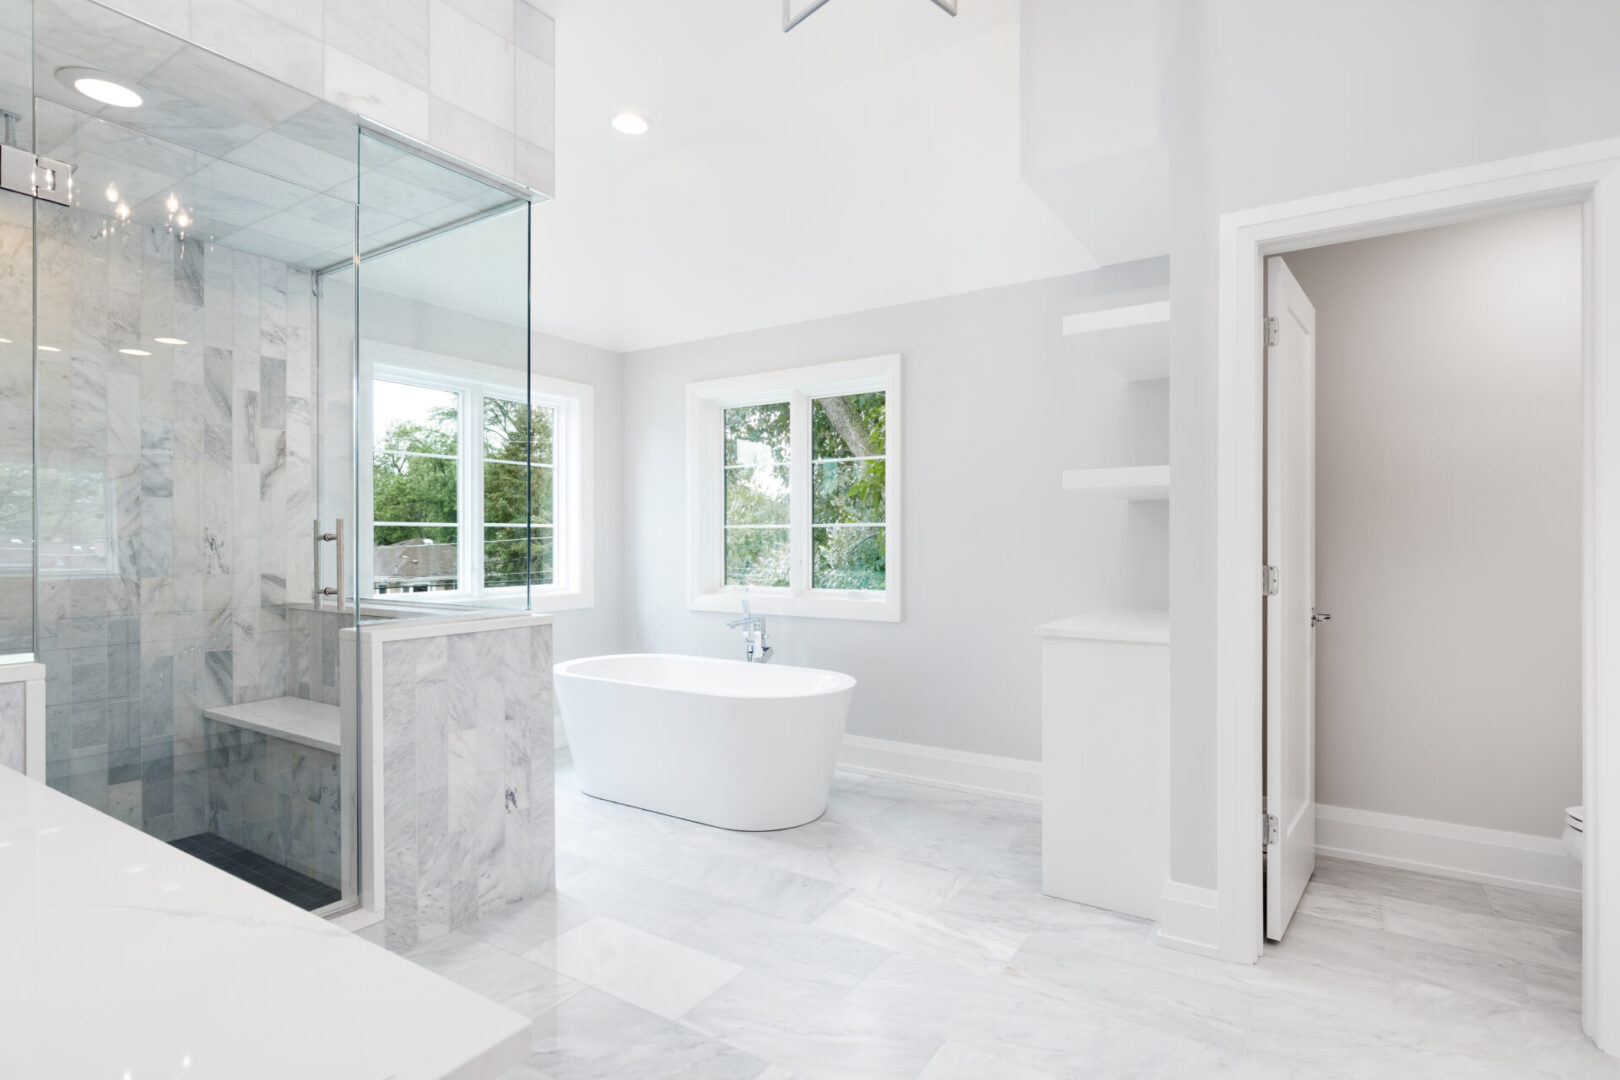 A white bathroom with a large tub and walk in shower.